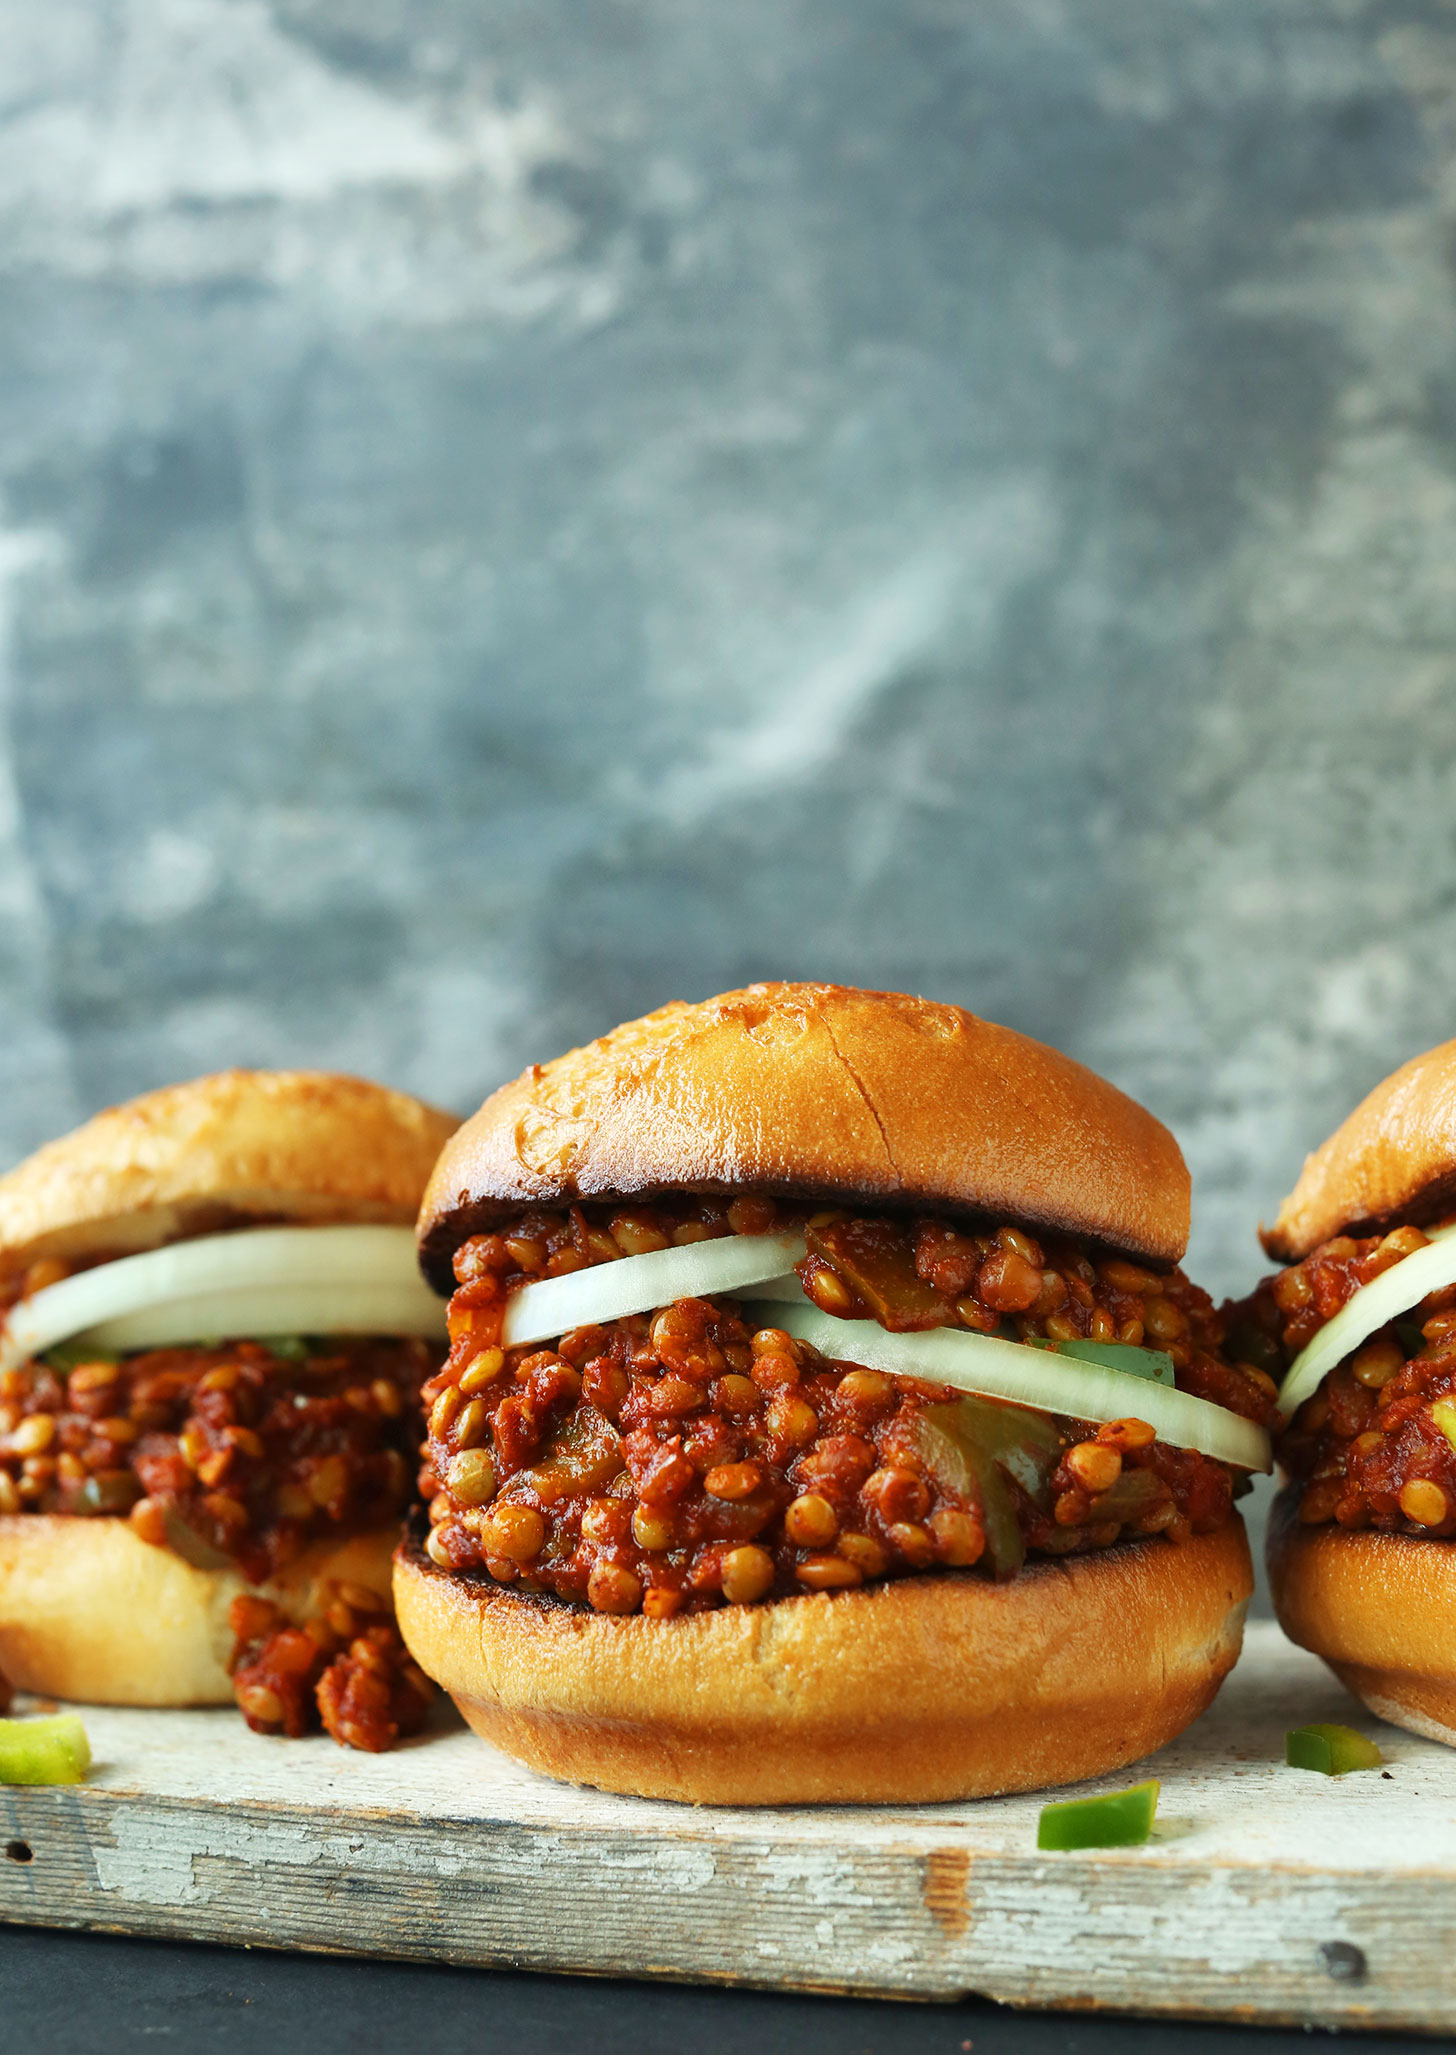 Buns filled with onion slices and Simple Vegan Sloppy Joes for a hearty plant-based meal